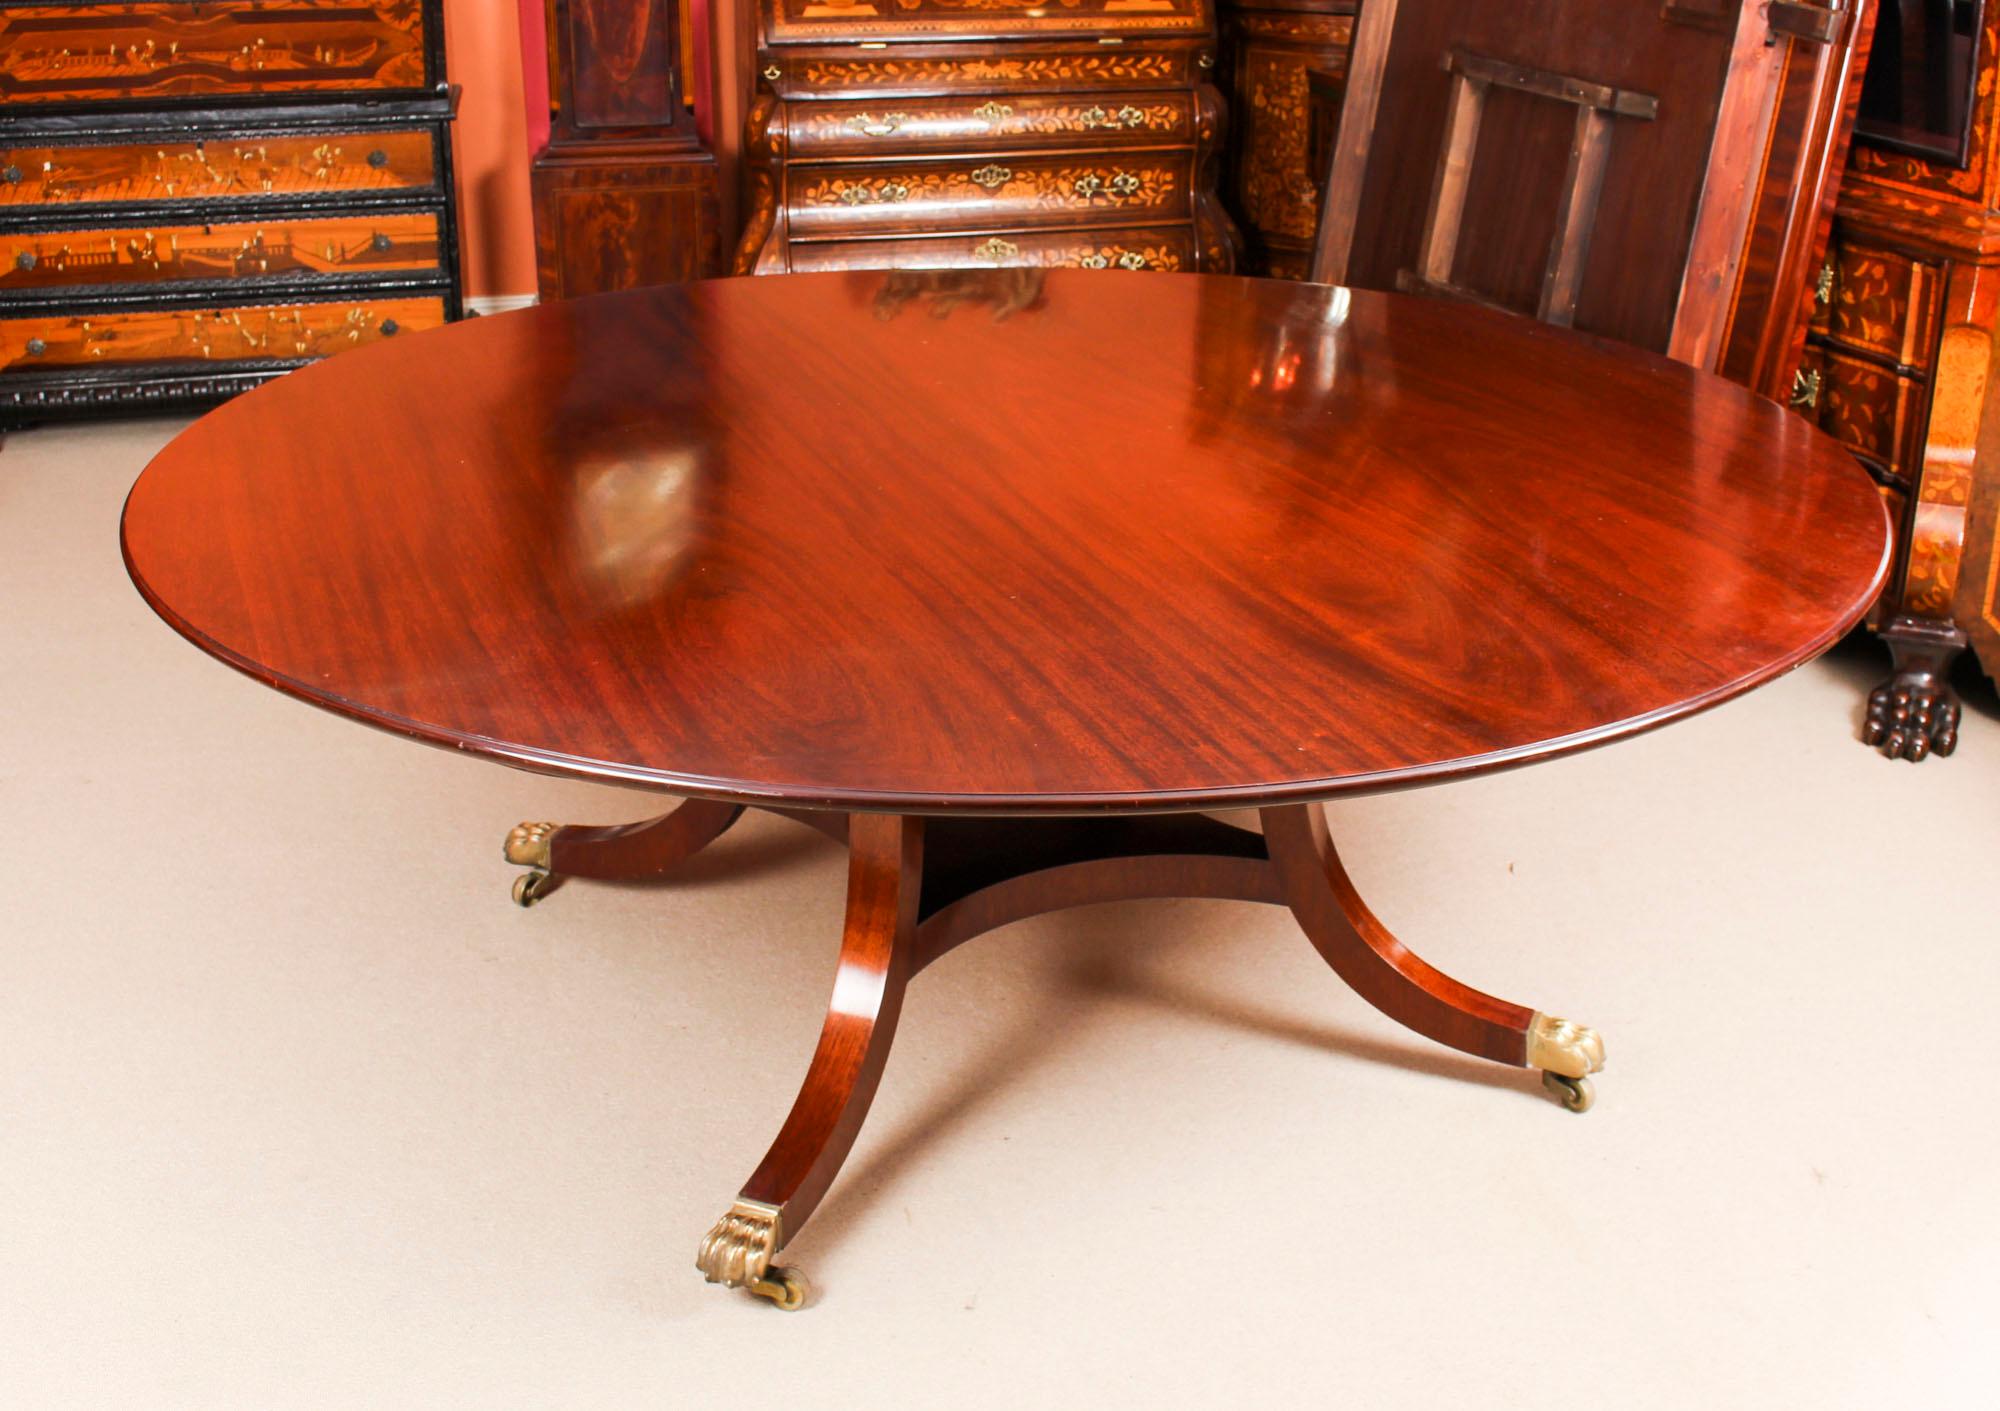 vintage round table and chairs